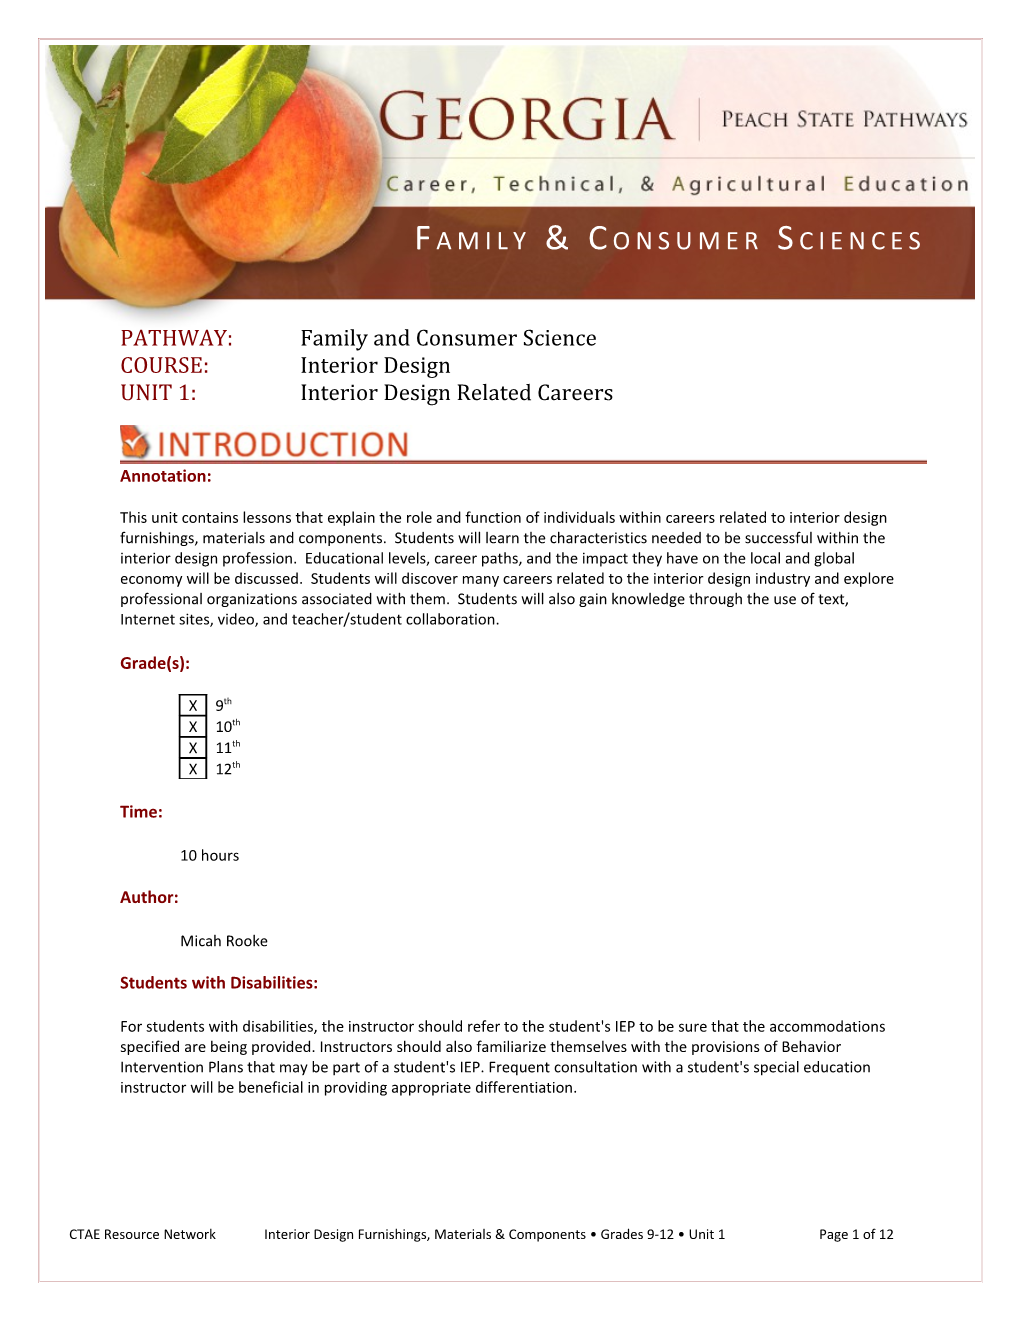 PATHWAY: Family and Consumer Science